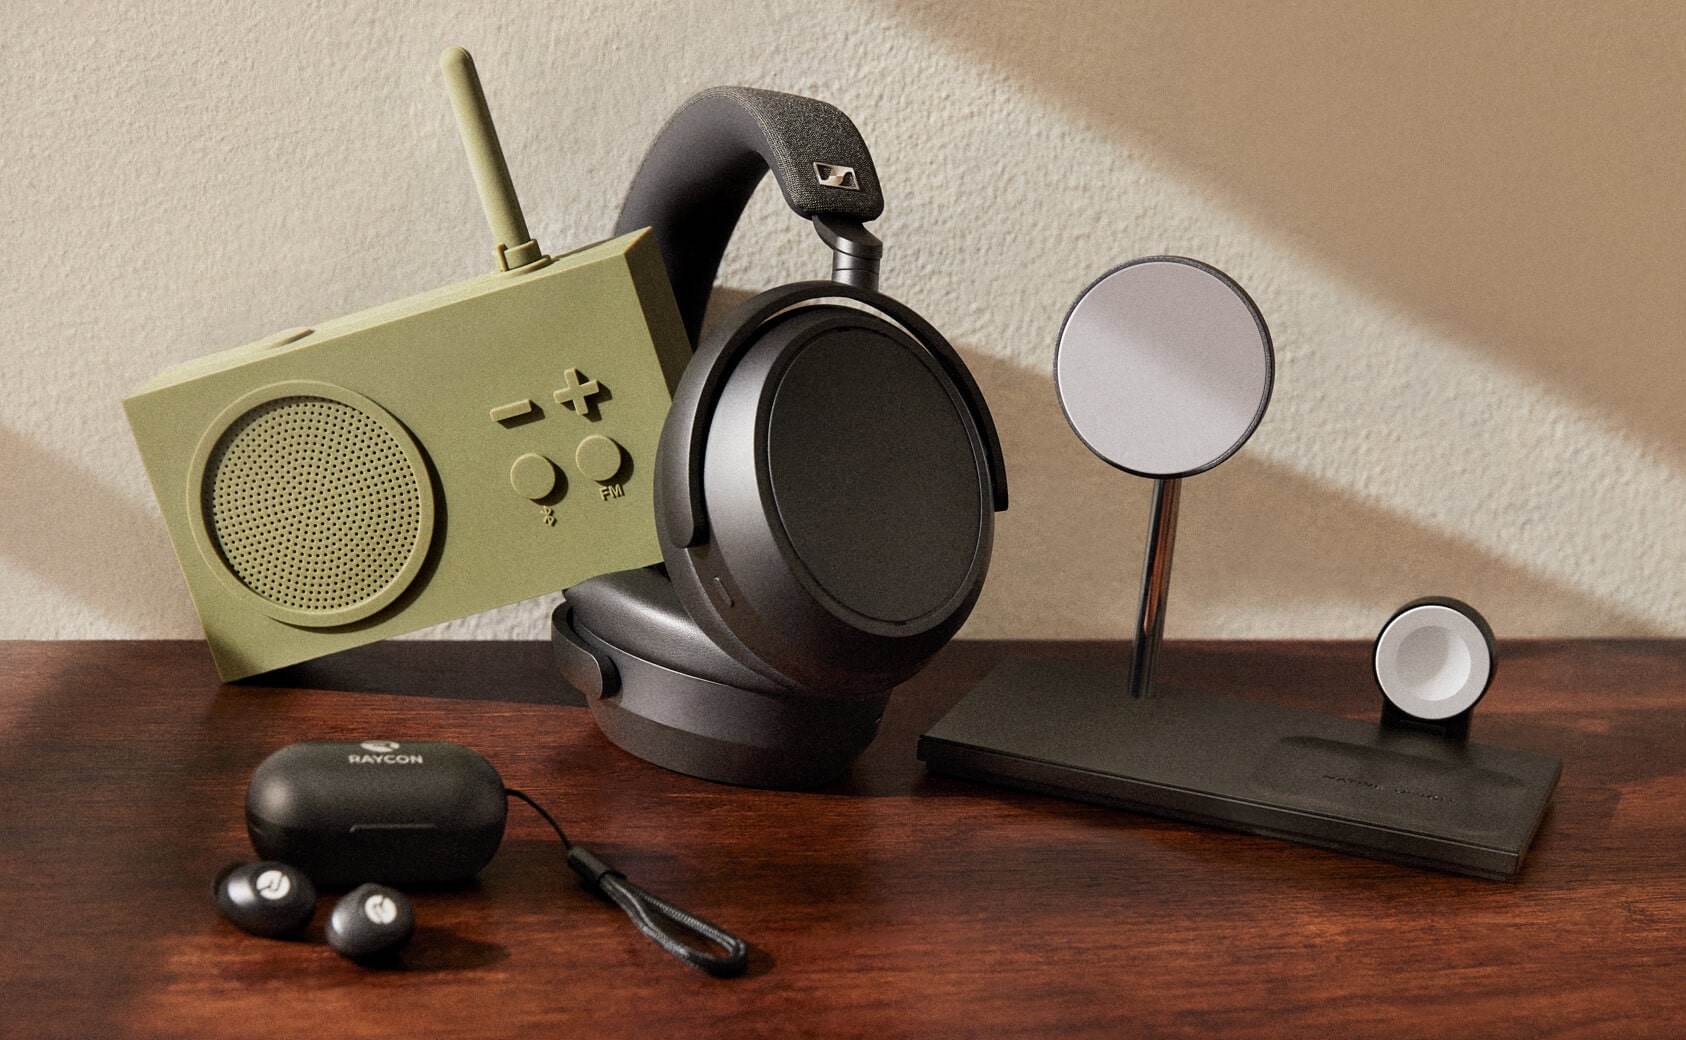 Image of various electronics from Indigo including wireless ear buds and wireless headphones